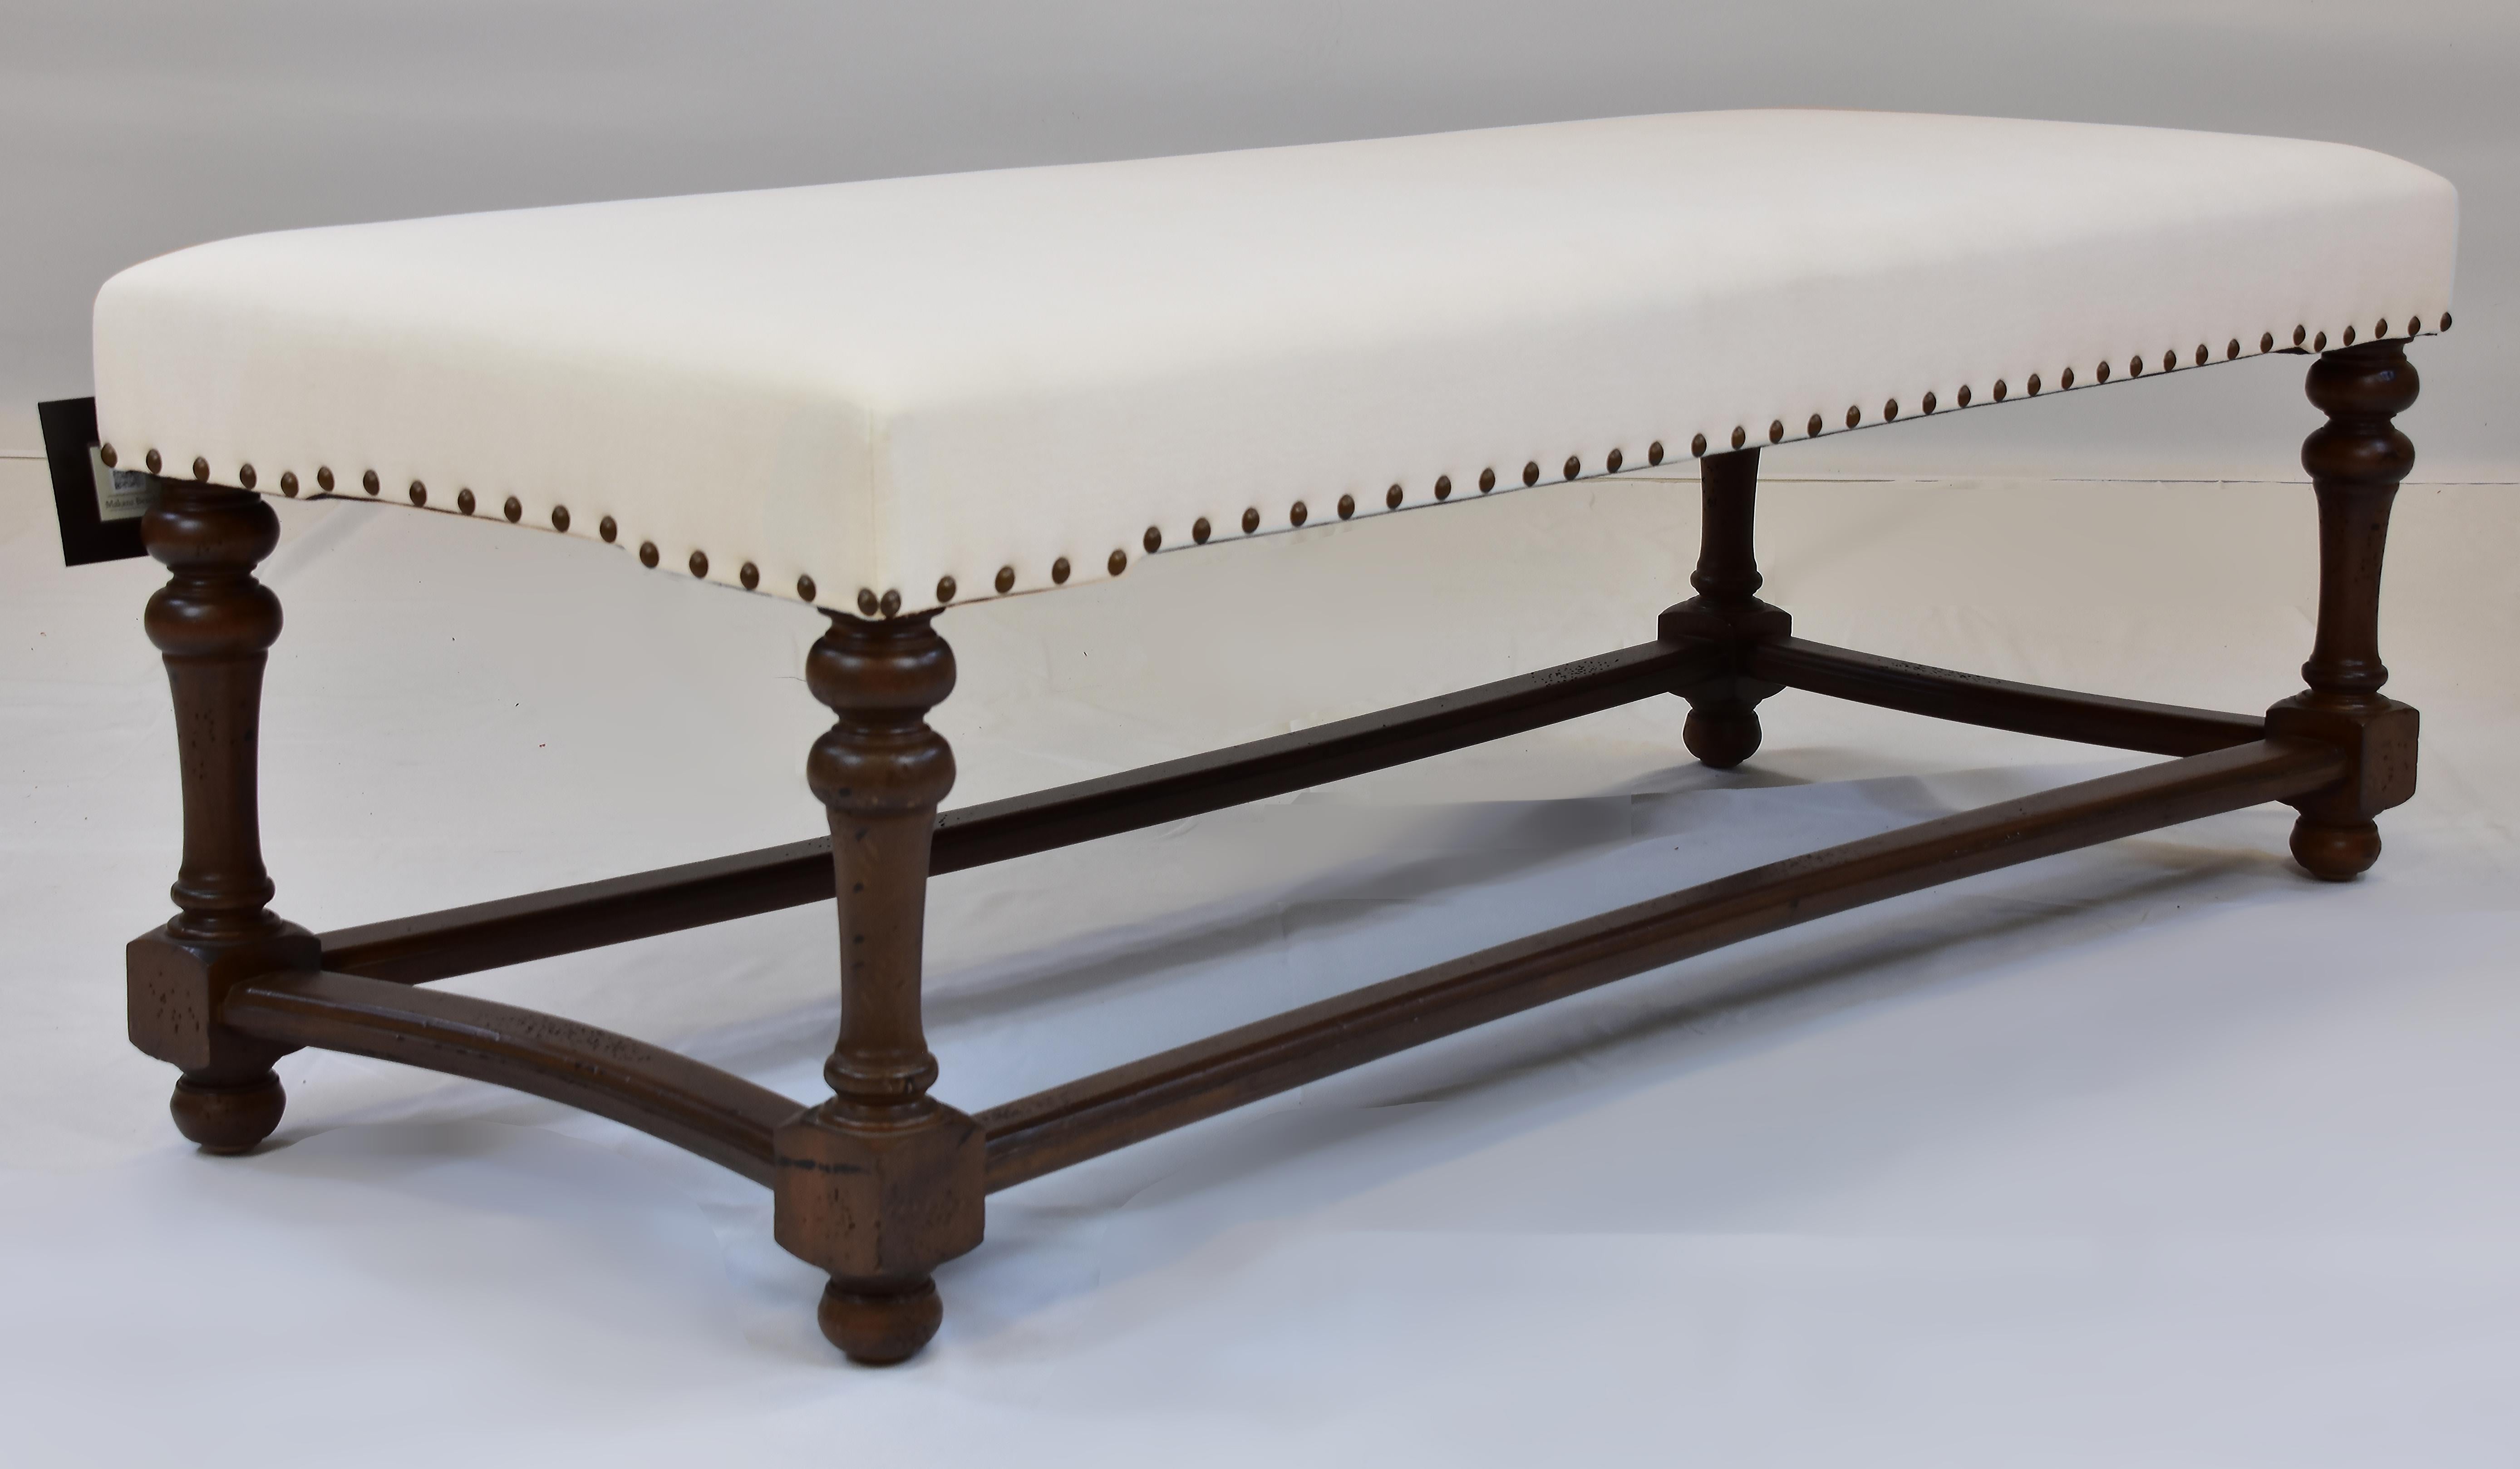 Le Jeune Upholstery Makana Bench Showroom Model with Nail Heads, Ivory Linen

Offered for sale is a Le Jeune Upholstery lMAKANA	B4.923 Bench showroom floor model.	This is a classic Bench style with traditional turned legs and curved stretchers. The